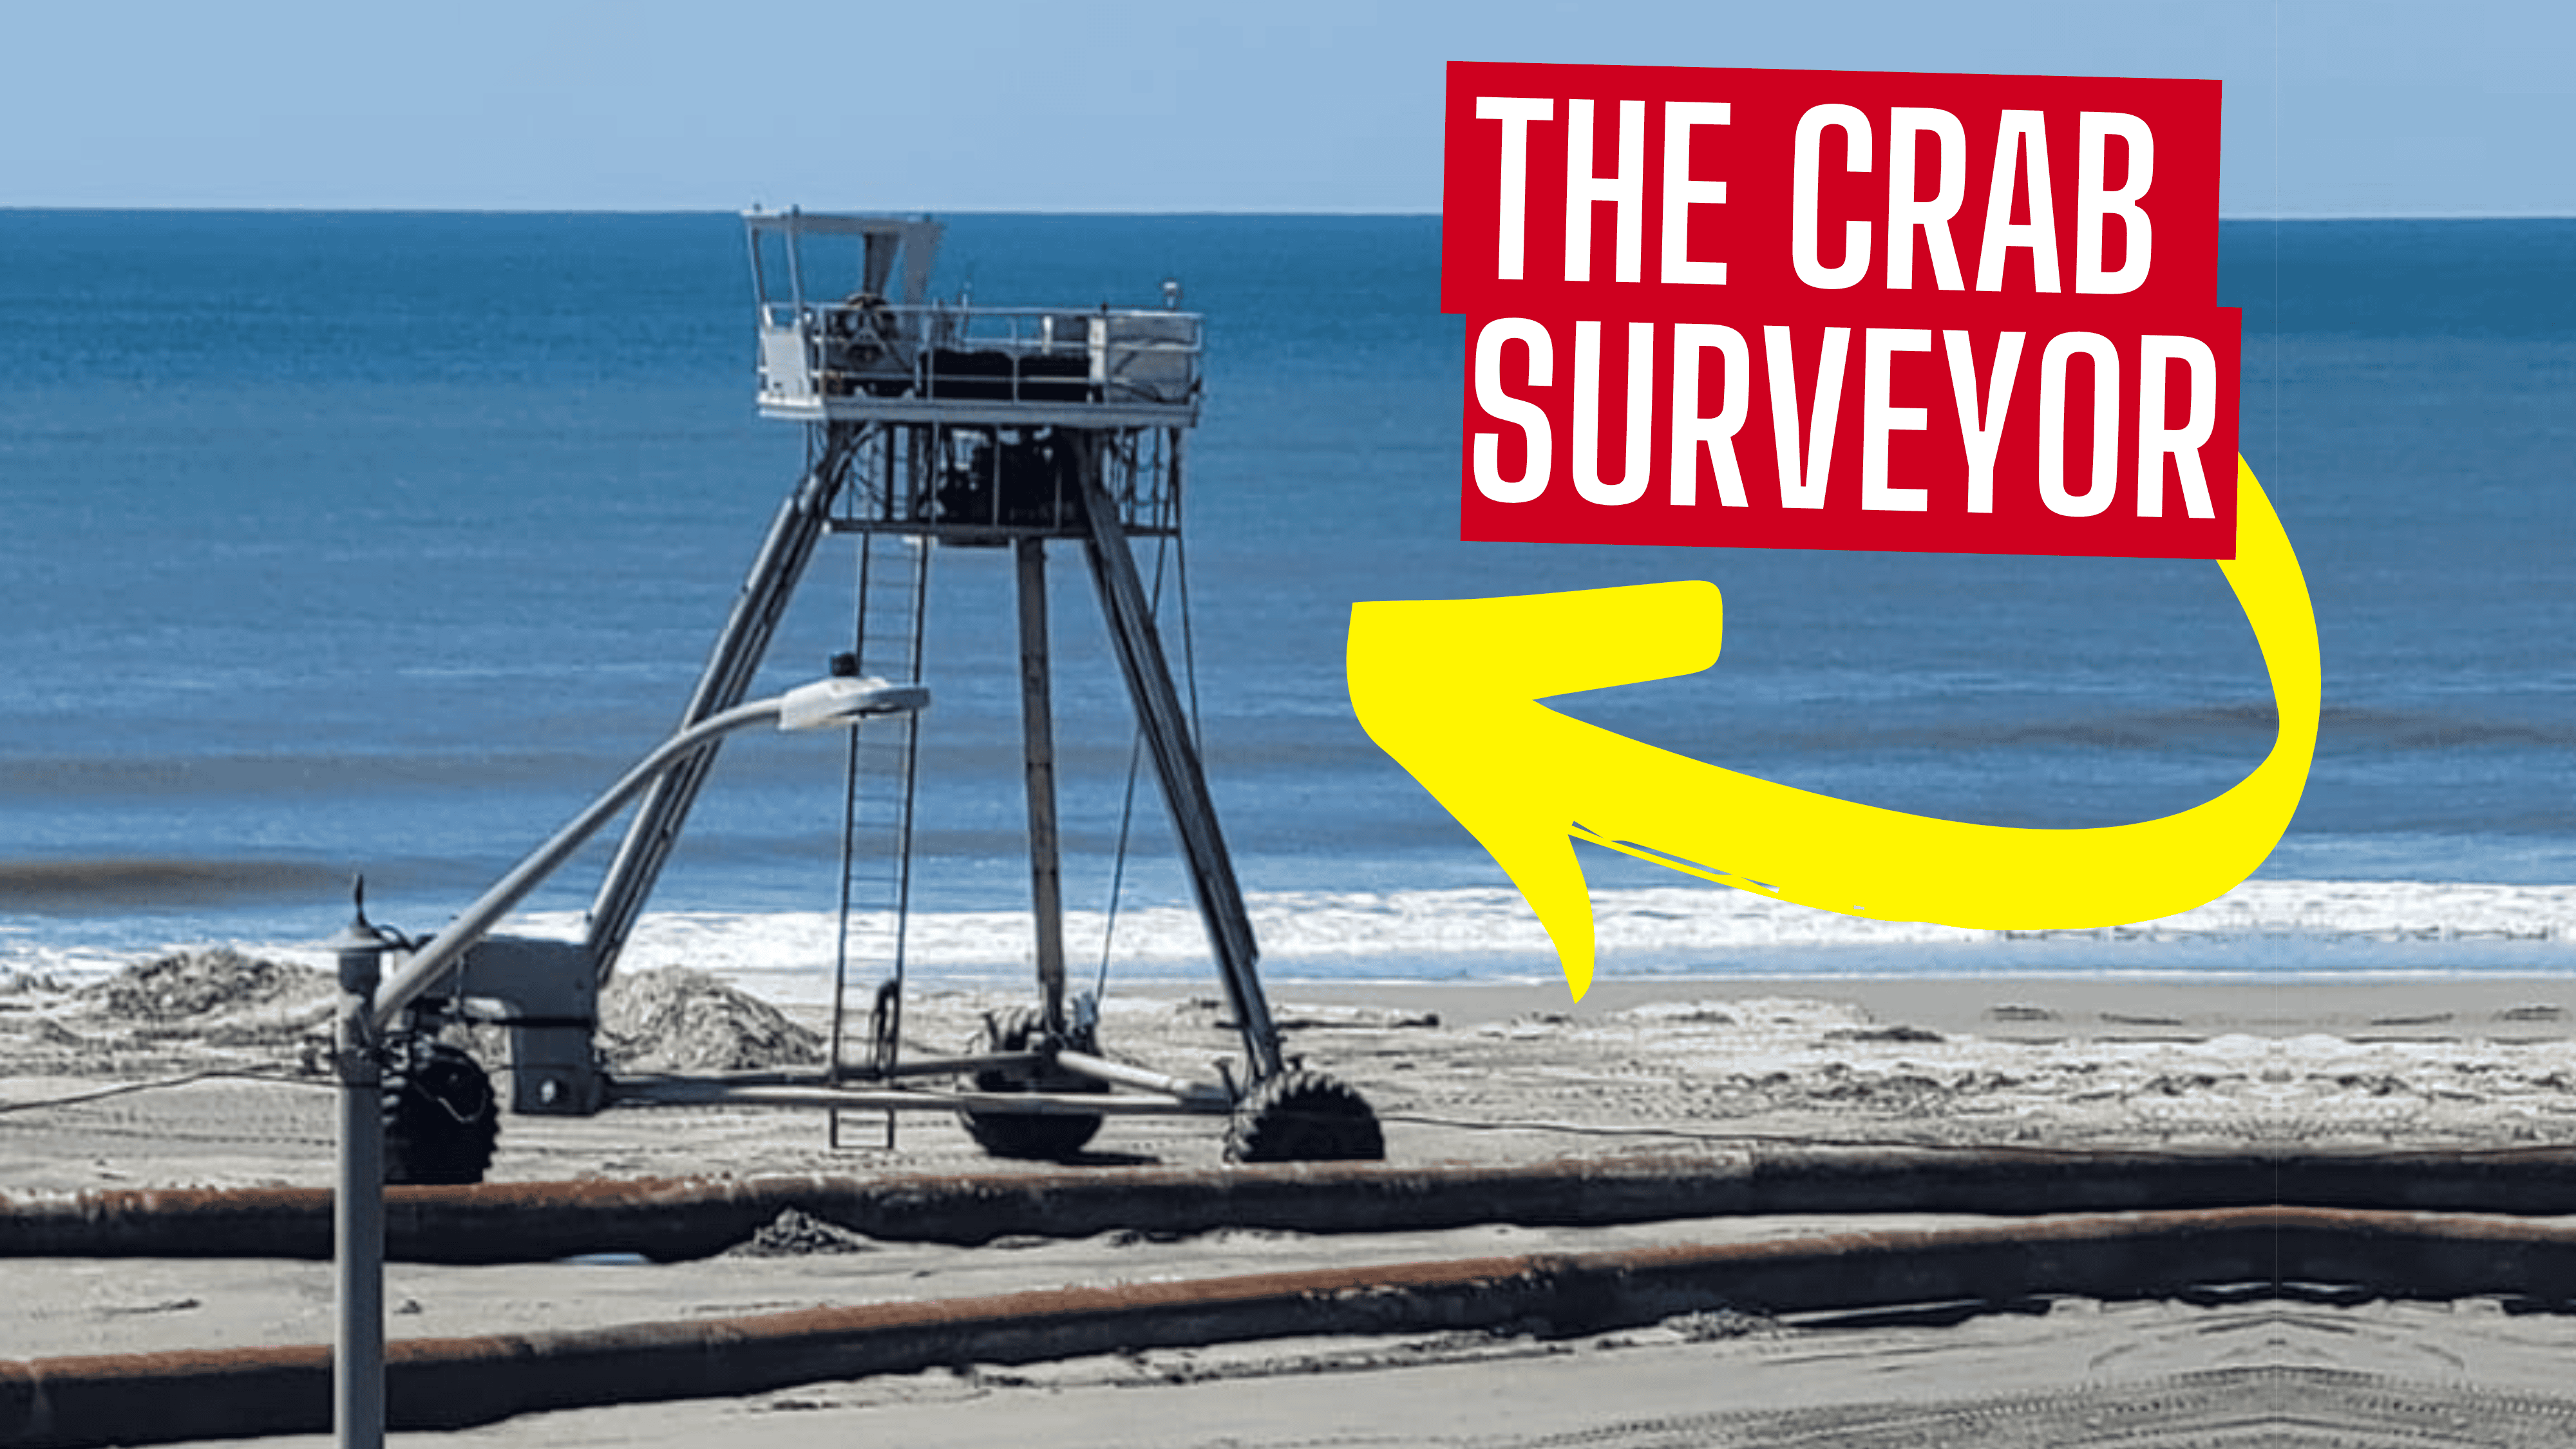 Explaining What This is - The CRAB Surveyor